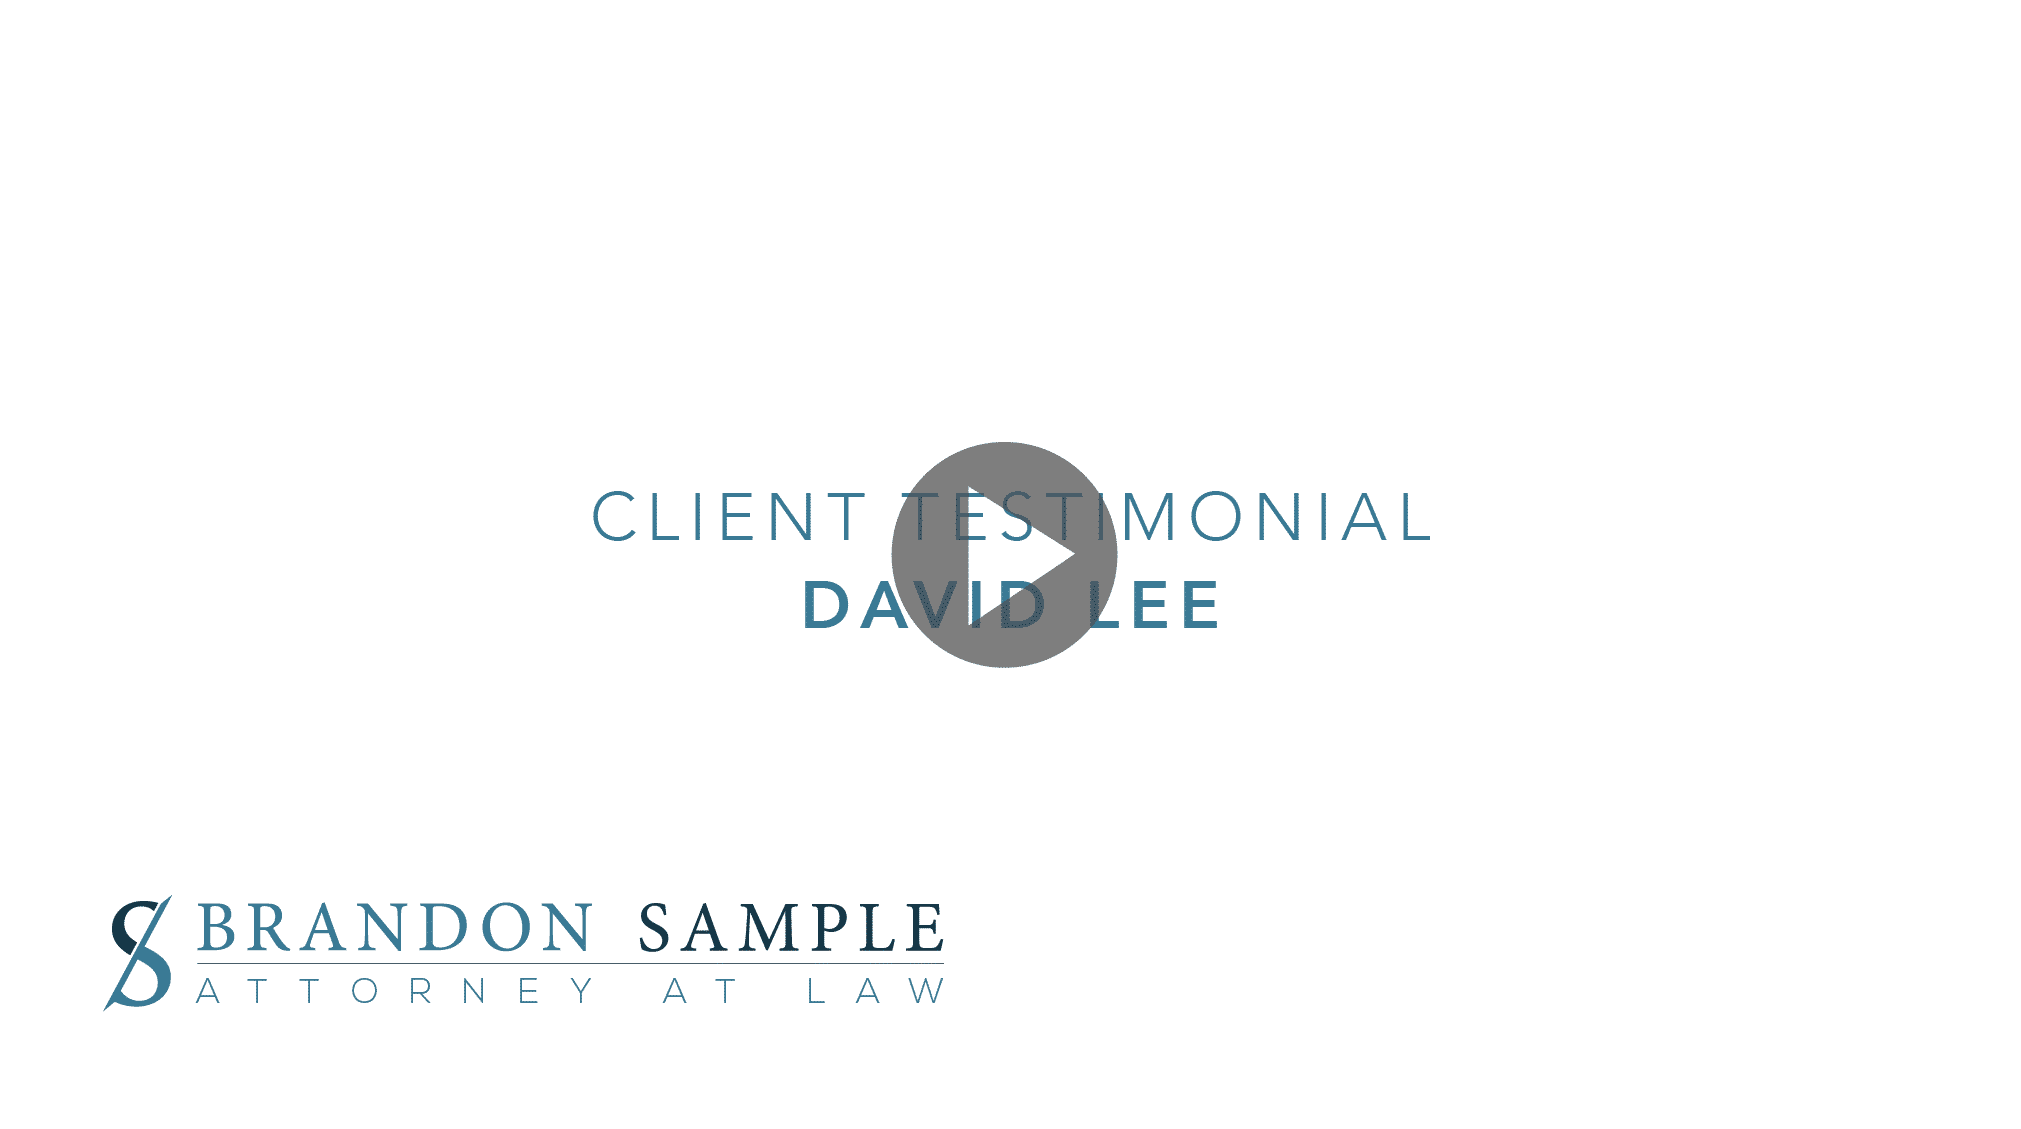 David Lee hired the Law Office of Brandon Sample to assist him in obtaining a sentence reduction under the First Step Act of 2018. After considering the filings by the Government and Brandon's office, the Court granted David relief--reducing David's sentence from LIFE to 210 months!
